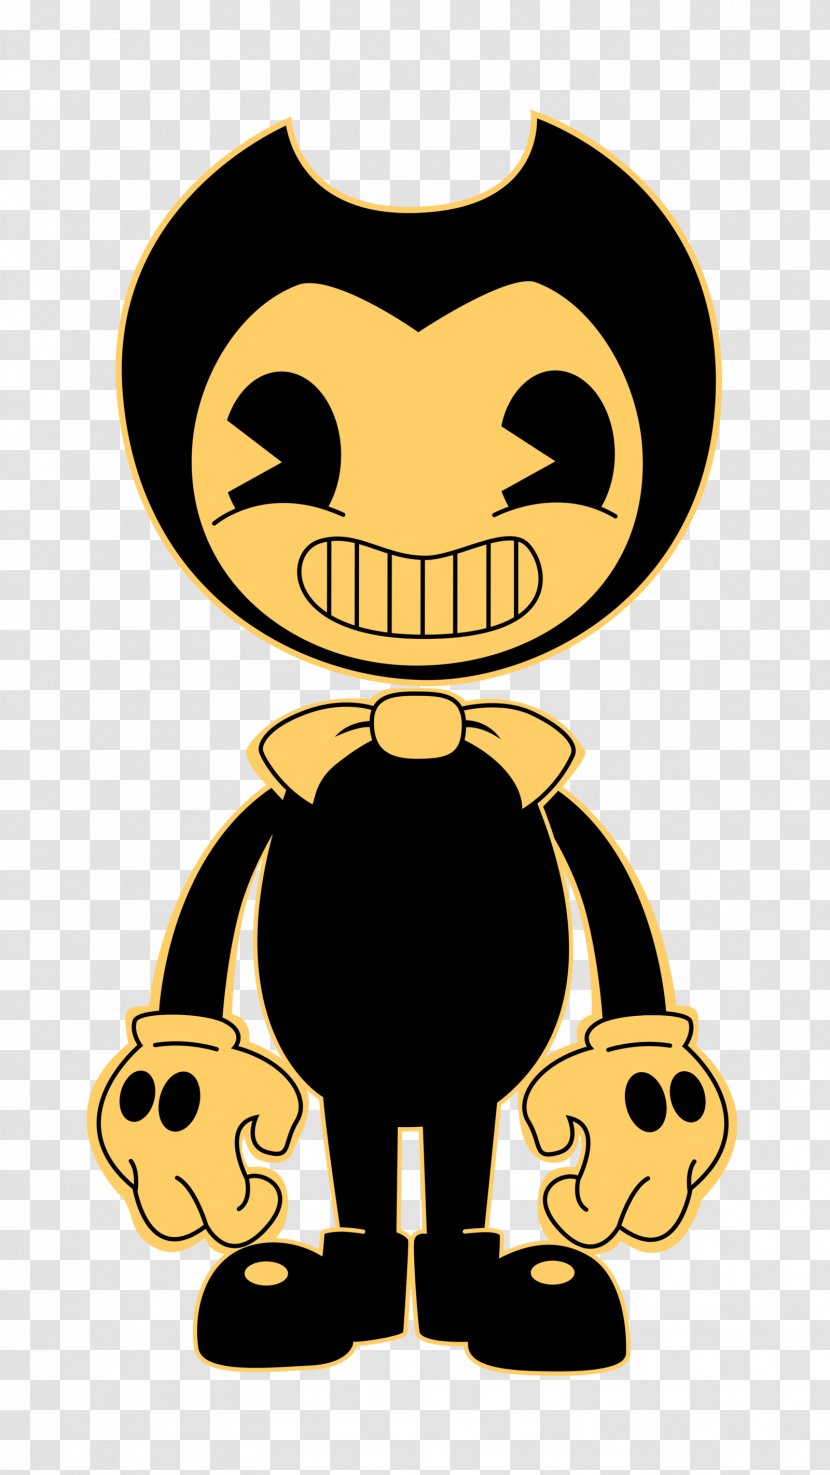 Bendy And The Ink Machine Video Game Player Character TheMeatly Games - Mammal - Raven Transparent PNG